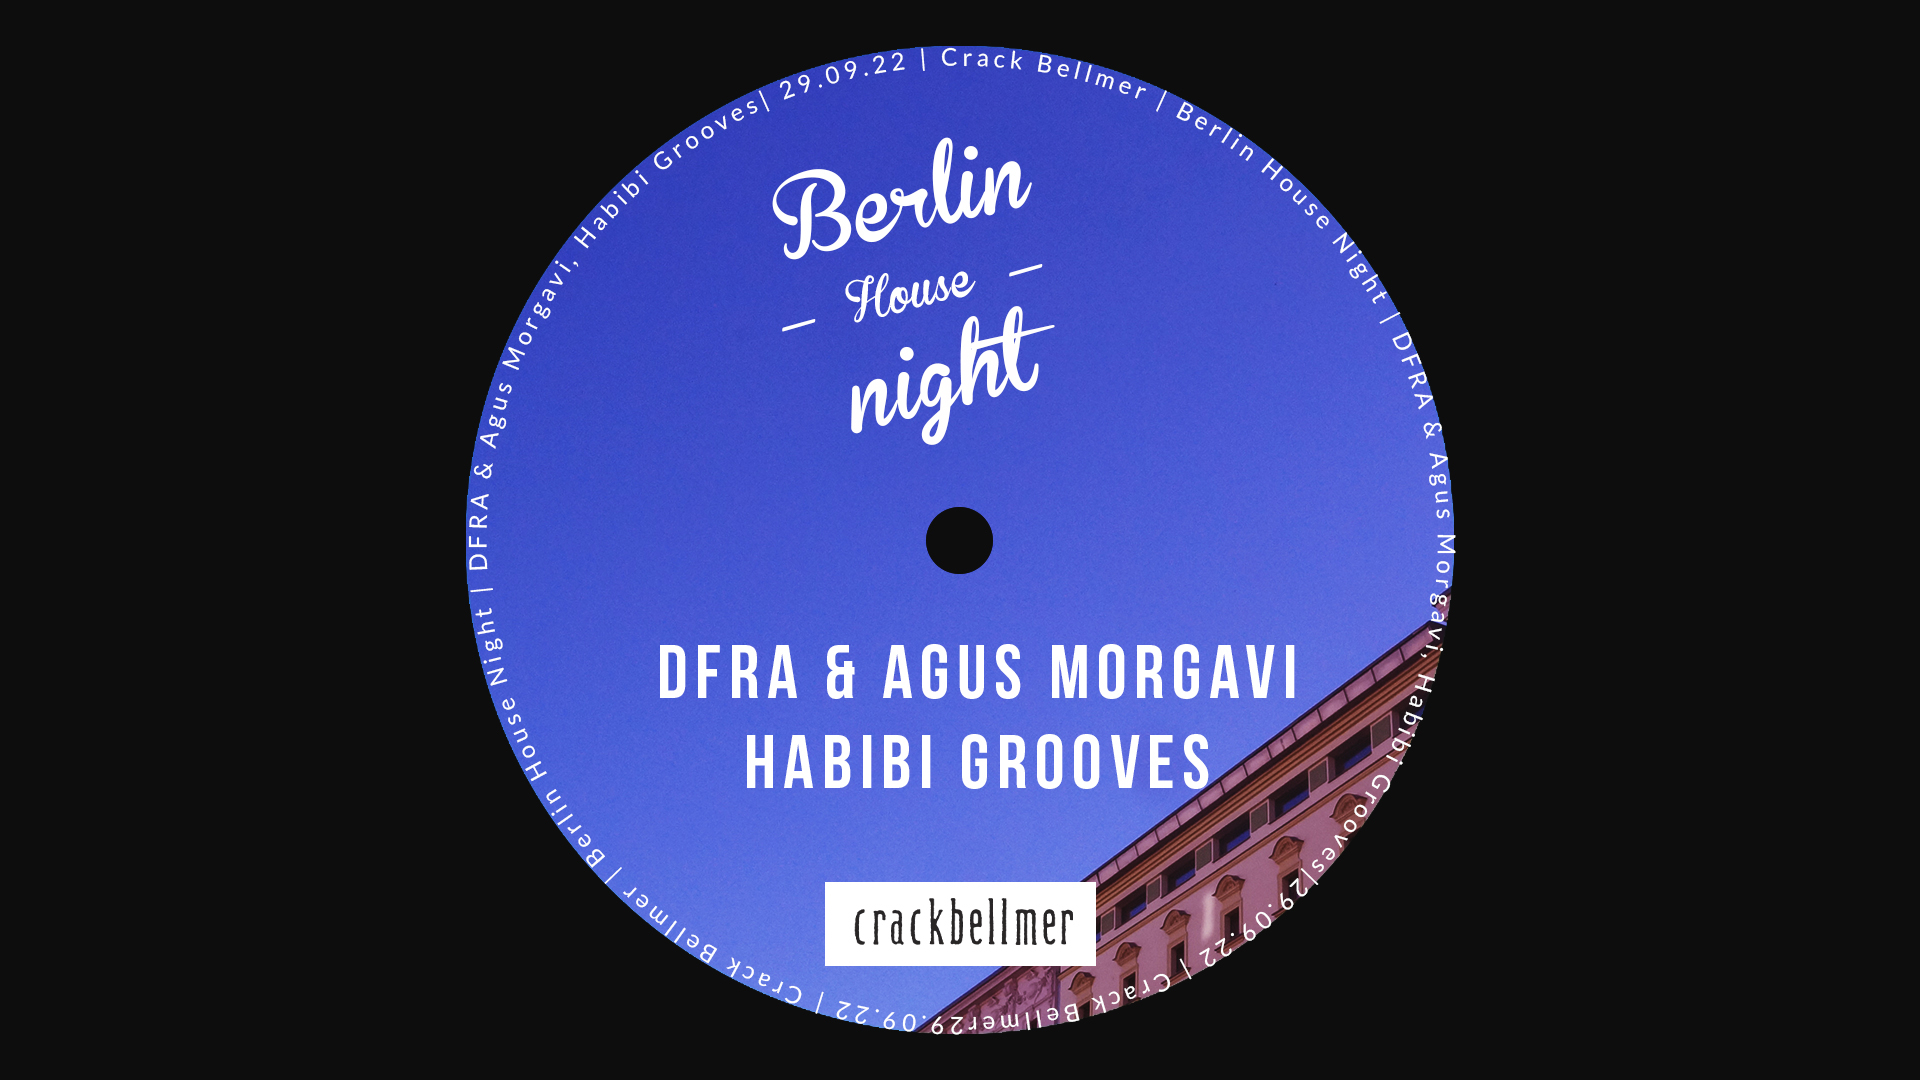 Berlin House Night with DFRA & Agus Morgavi, Habibi Grooves - Flyer front